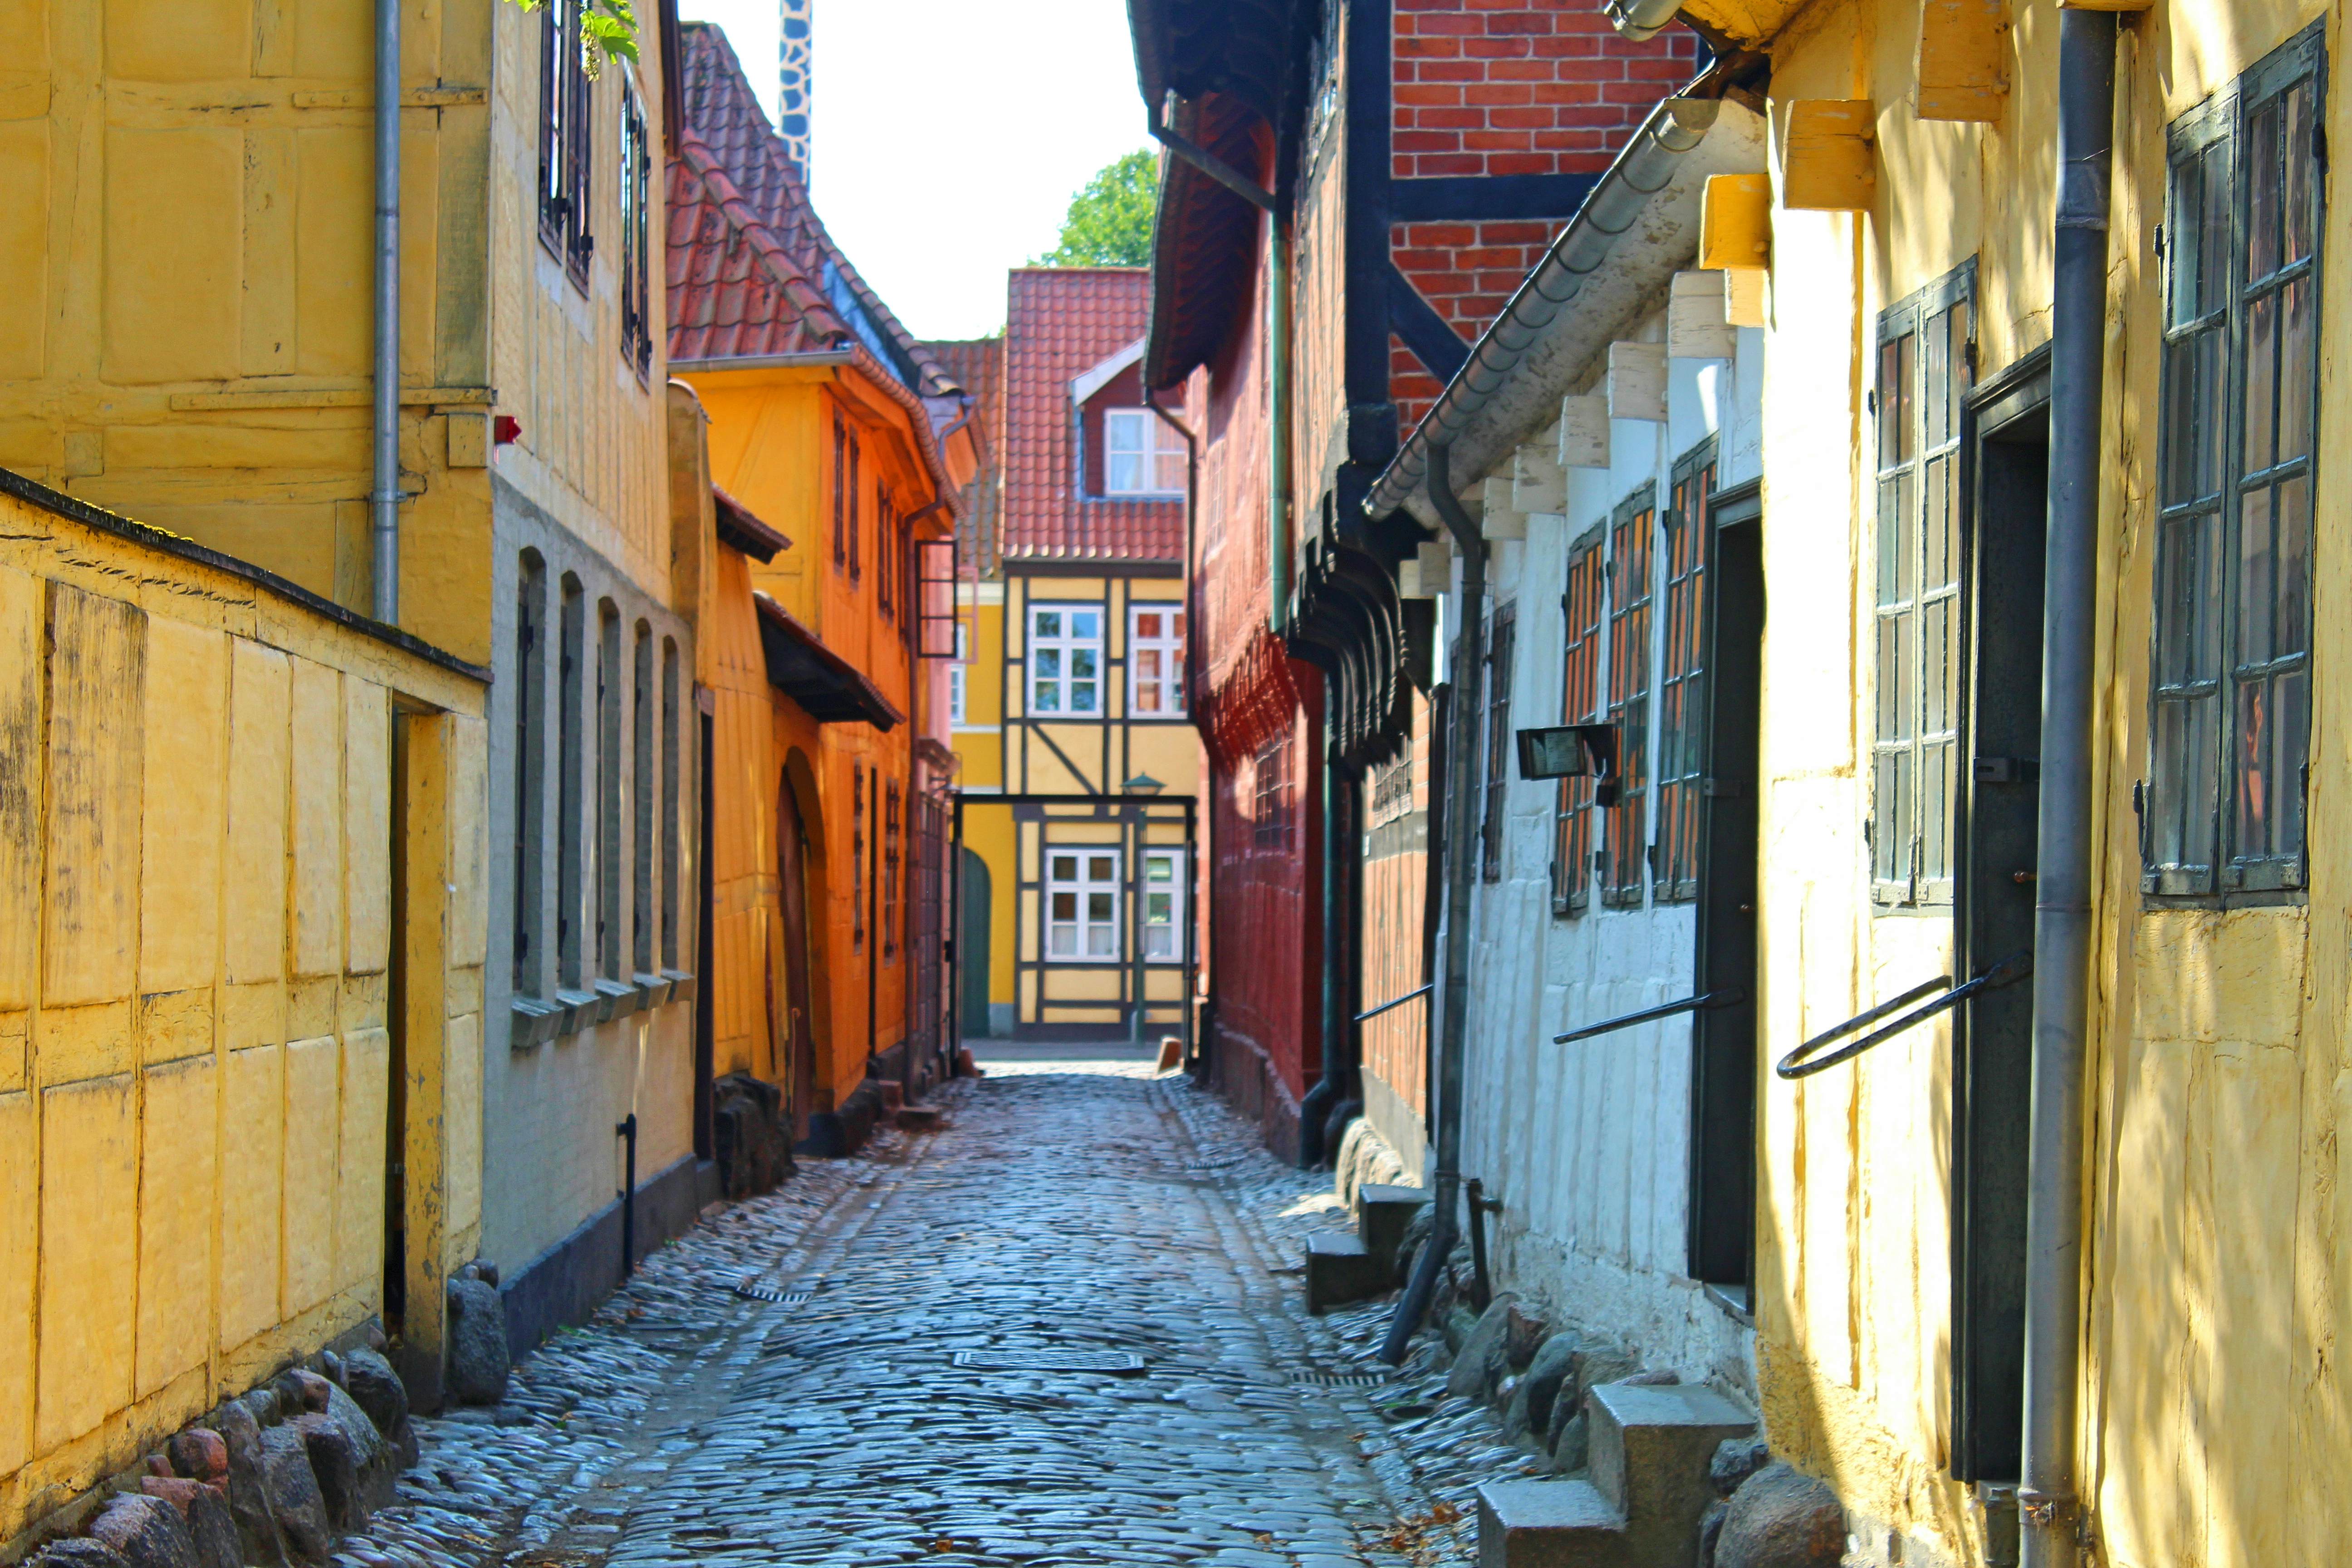 Why Odense Denmark Should Be On Your Travel List Lonely Planet